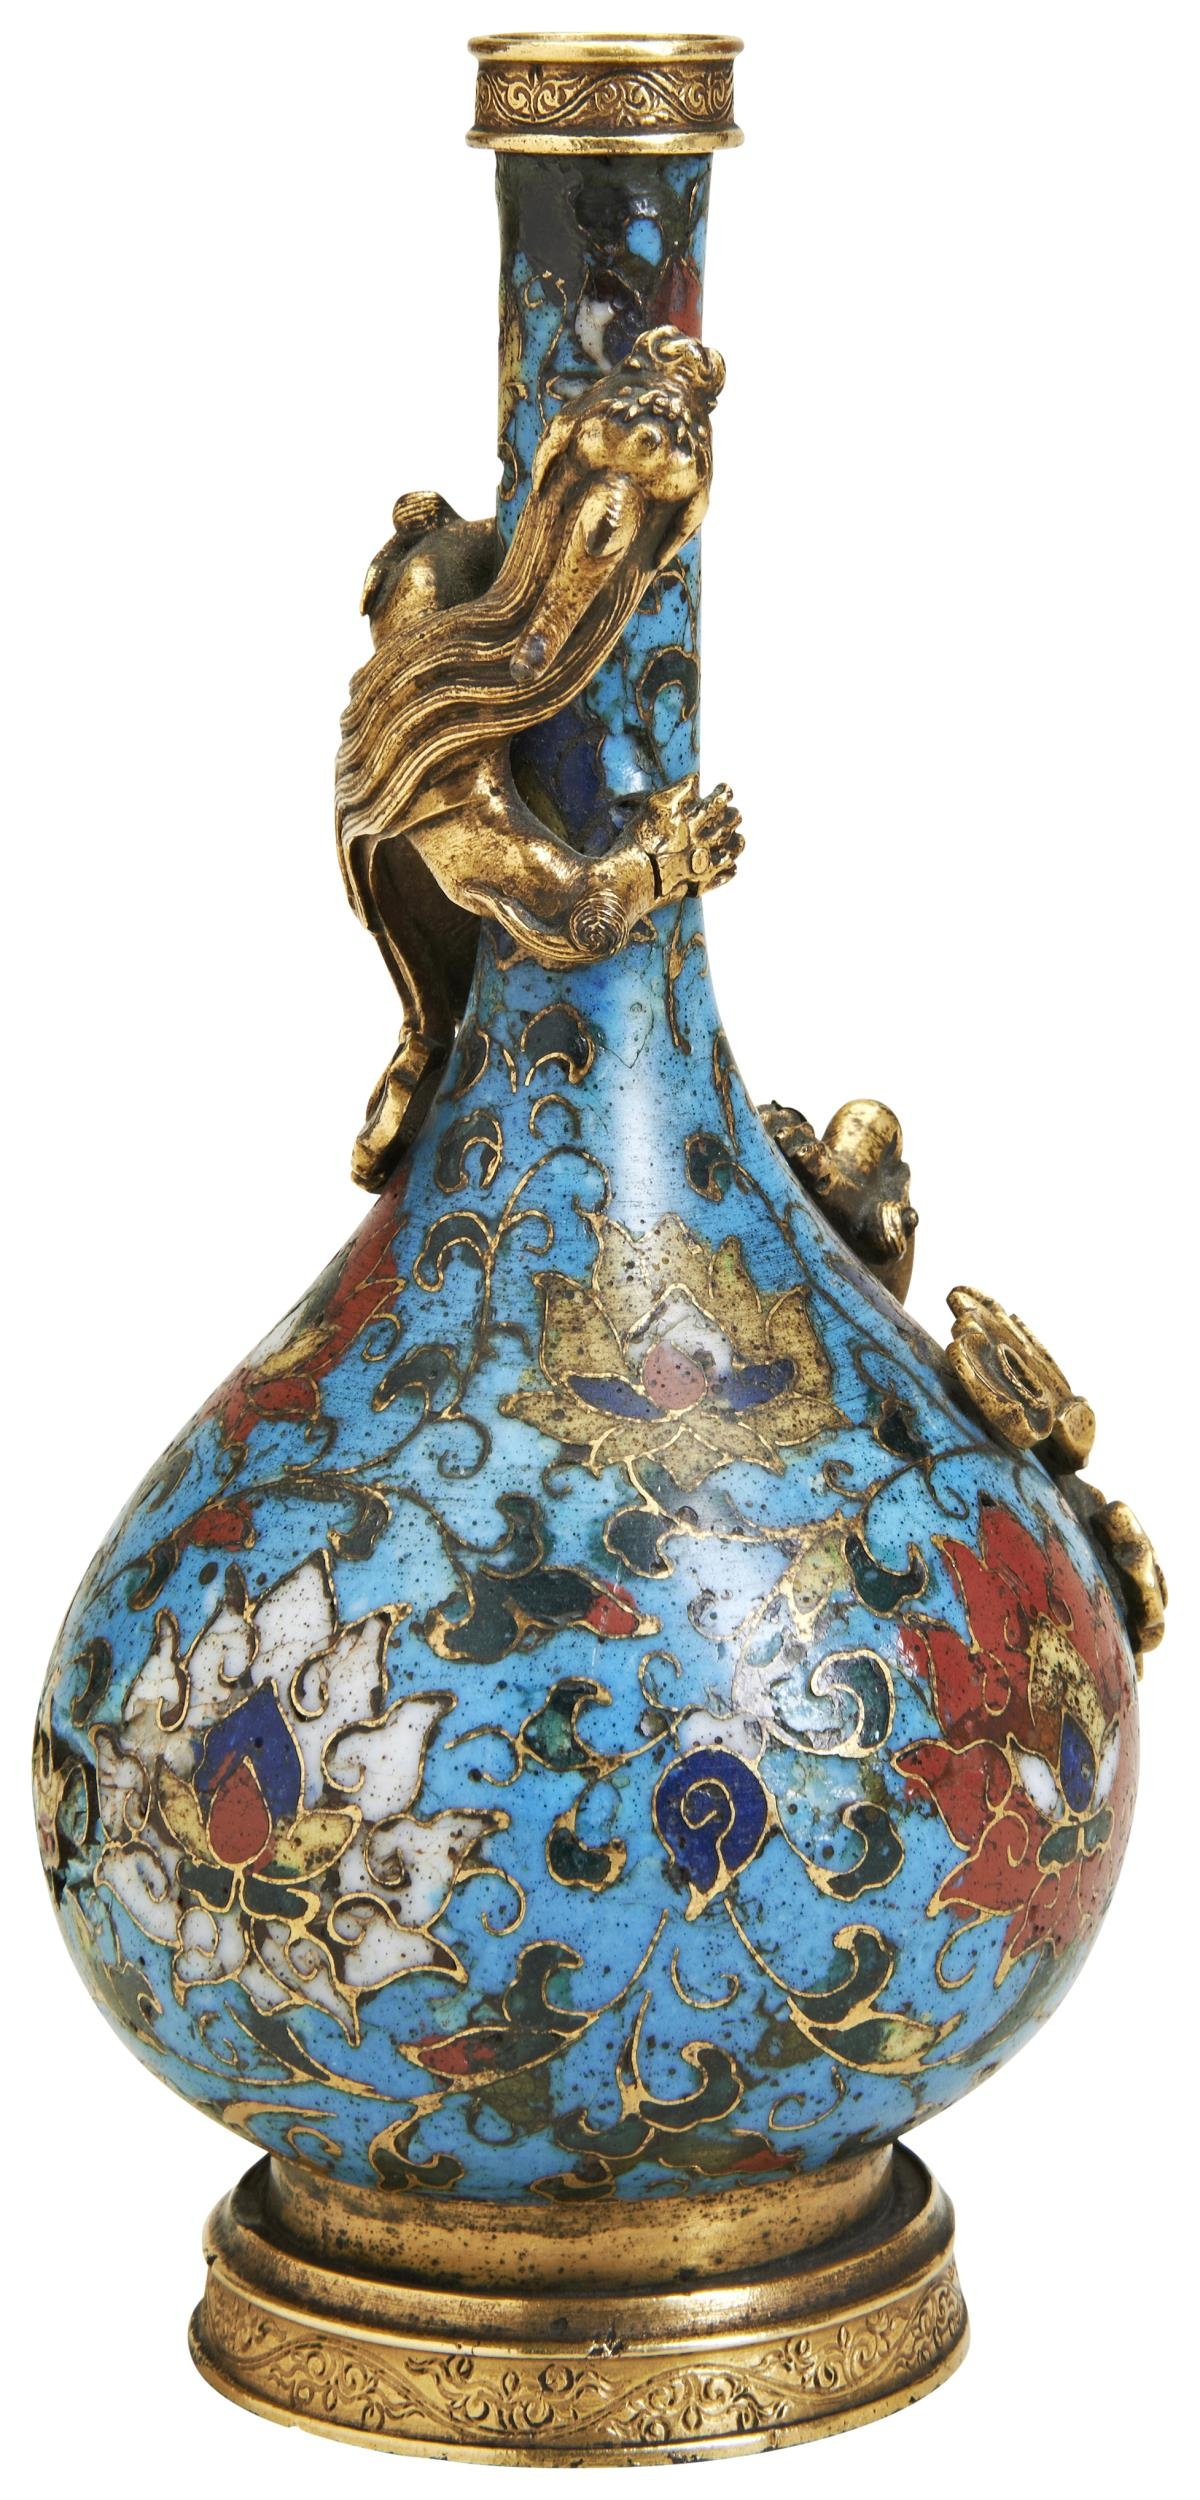 A FINE AND RARE CLOISONNE ENAMEL 'LOTUS' BOTTLE VASE INCISED JINGTAI SIX CHARACTER MARK, MID MING - Image 3 of 6